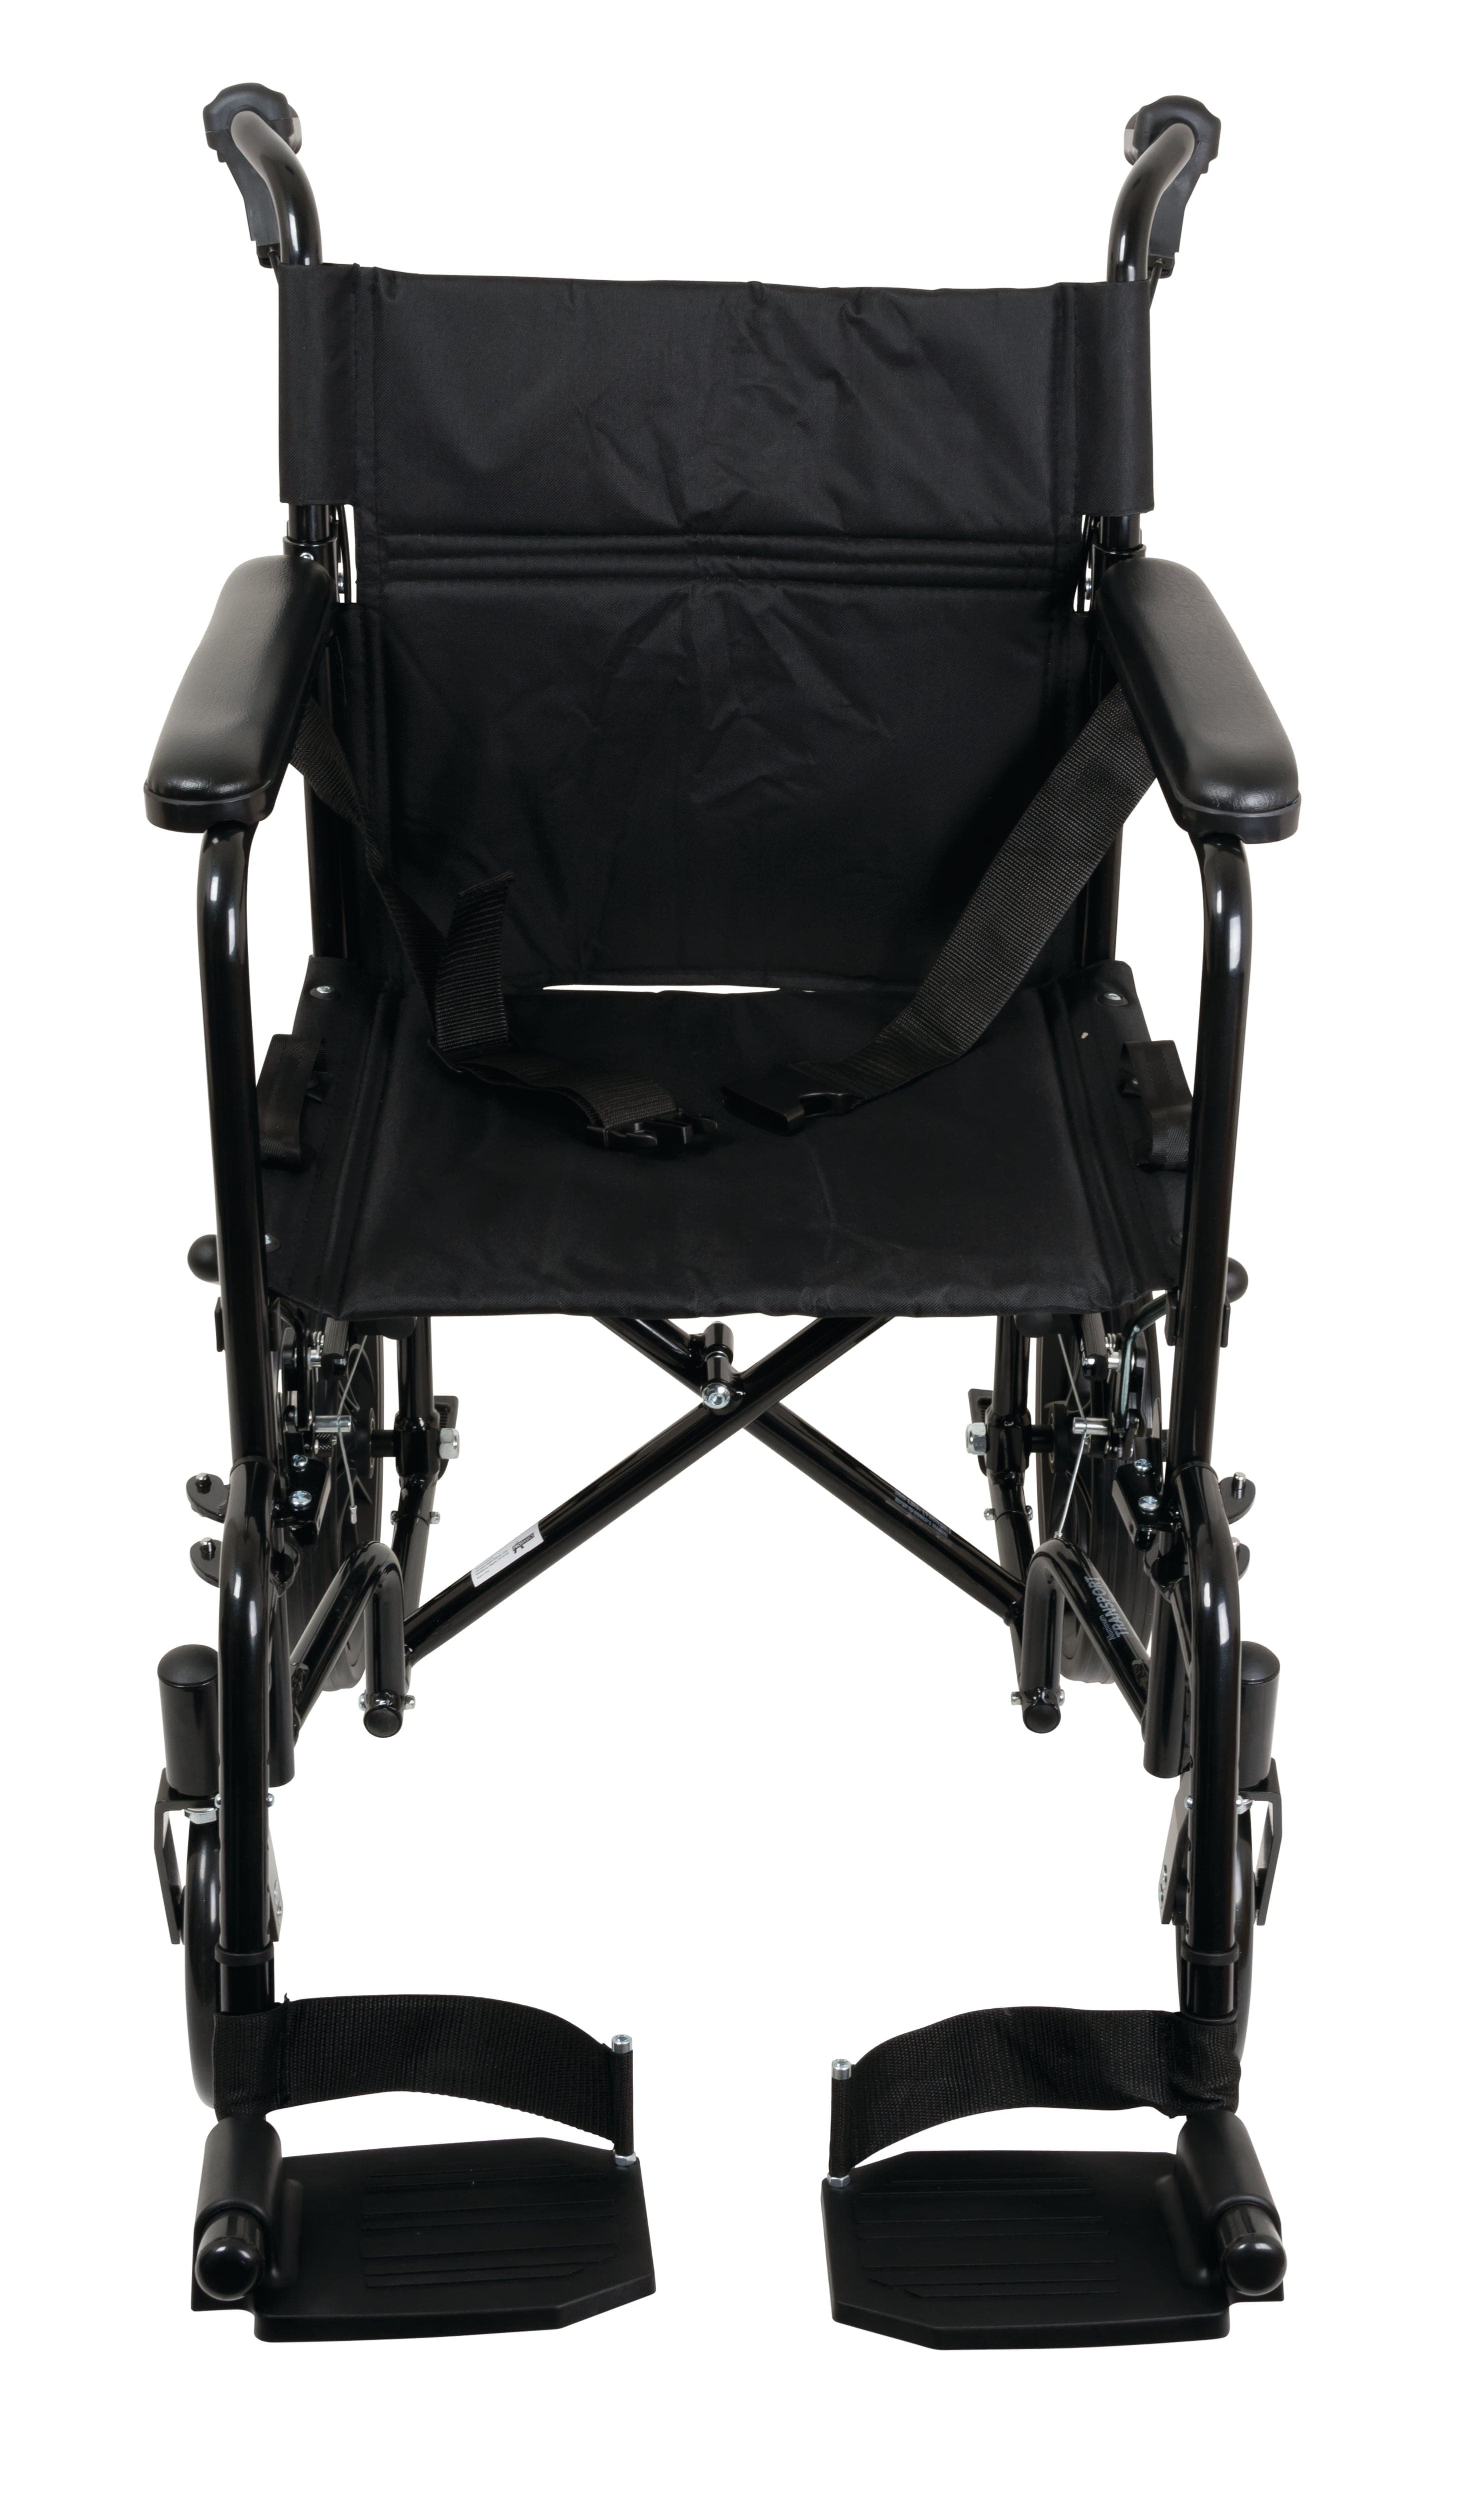 Compass Health Compass Health ProBasics Aluminum Transport Chair with 12-Inch Wheels, TCA191612BK